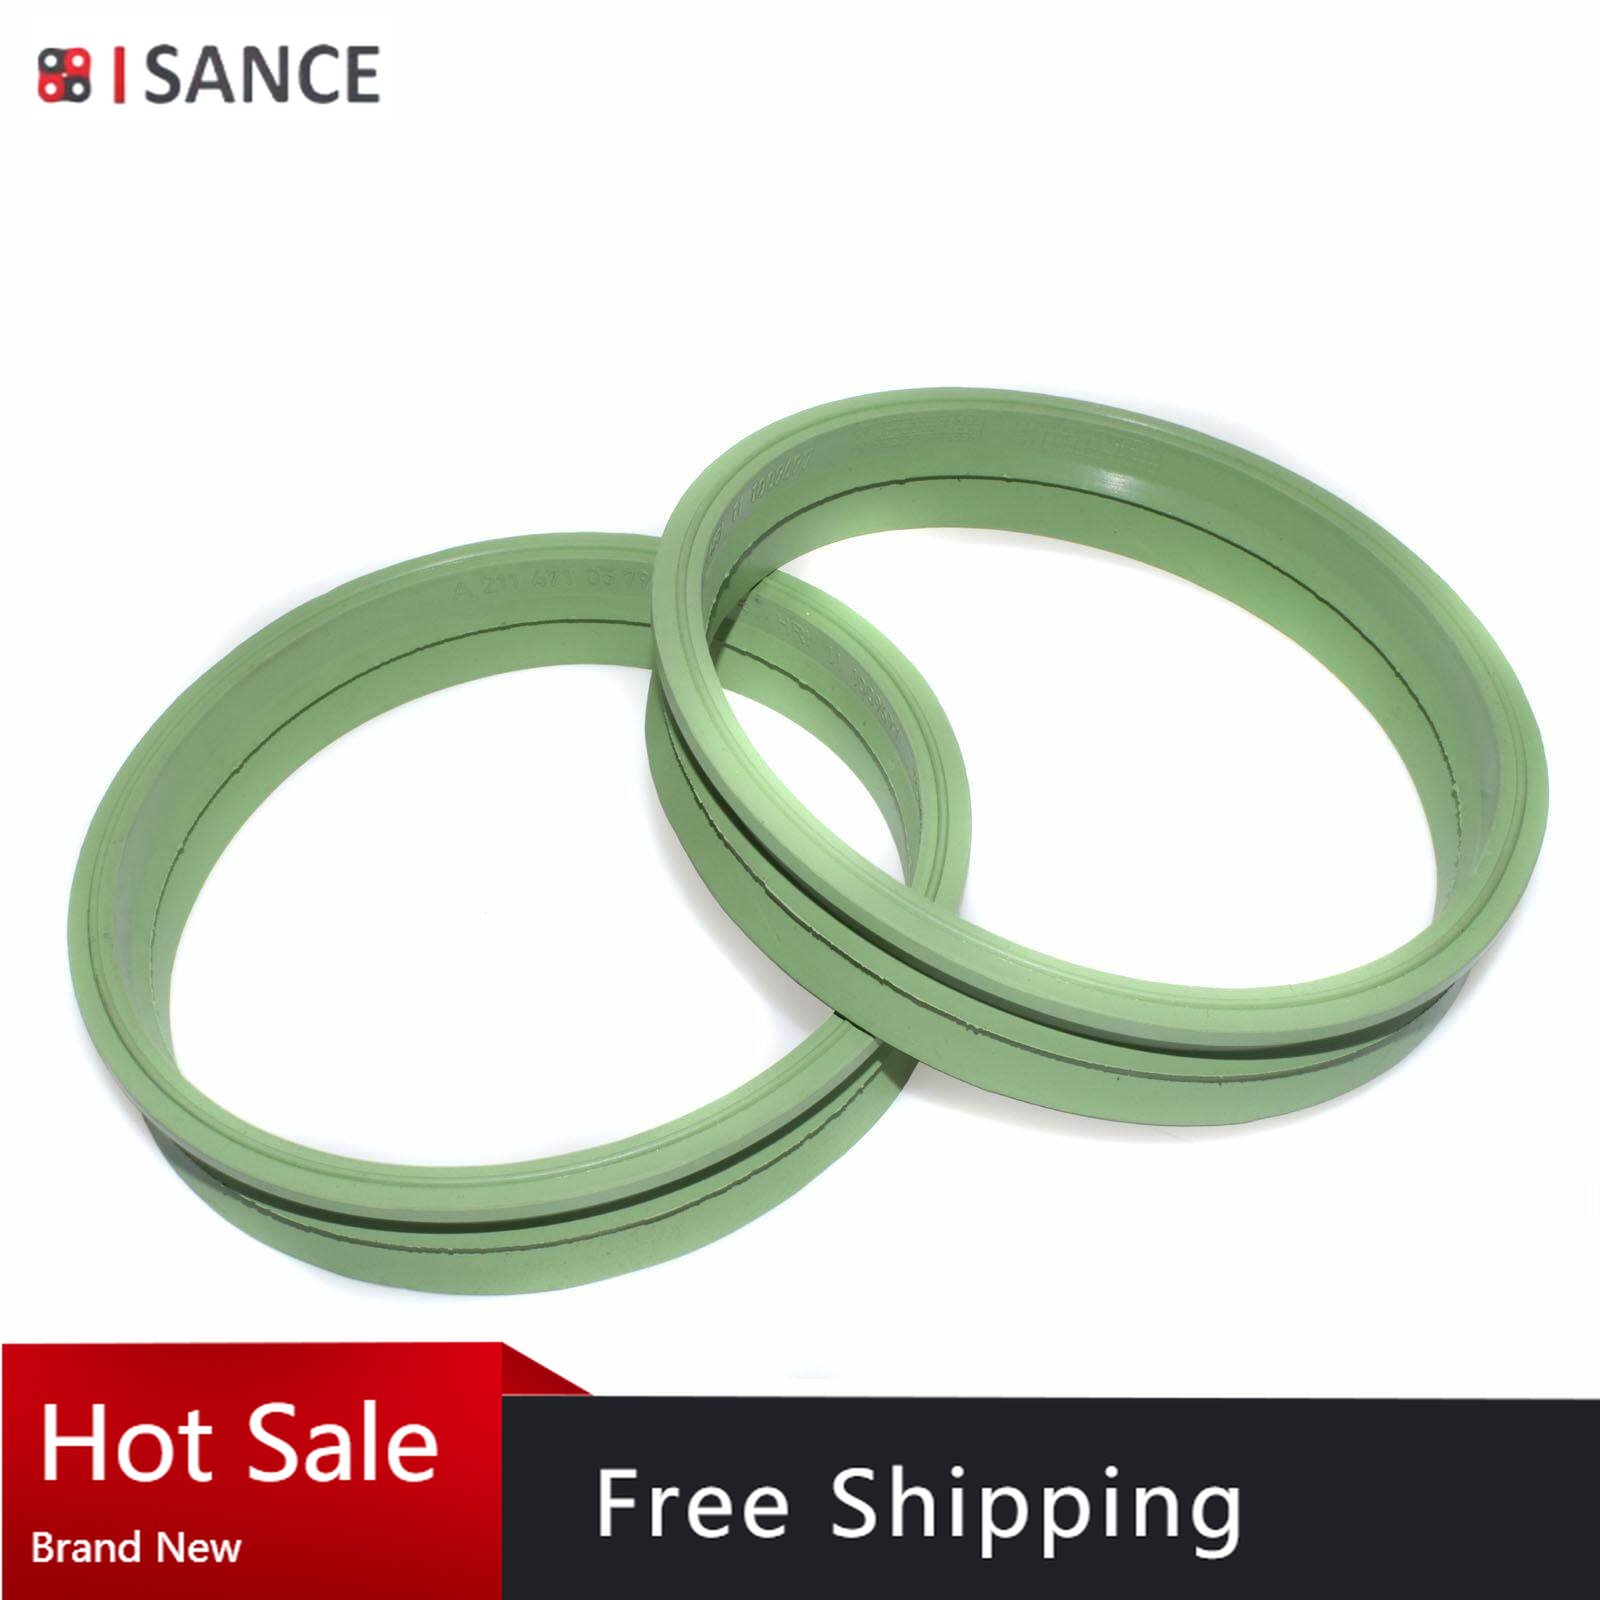 2pcs Fuel Pump Seal Gasket Ring for 2114710579 Benz W203 W209 W211